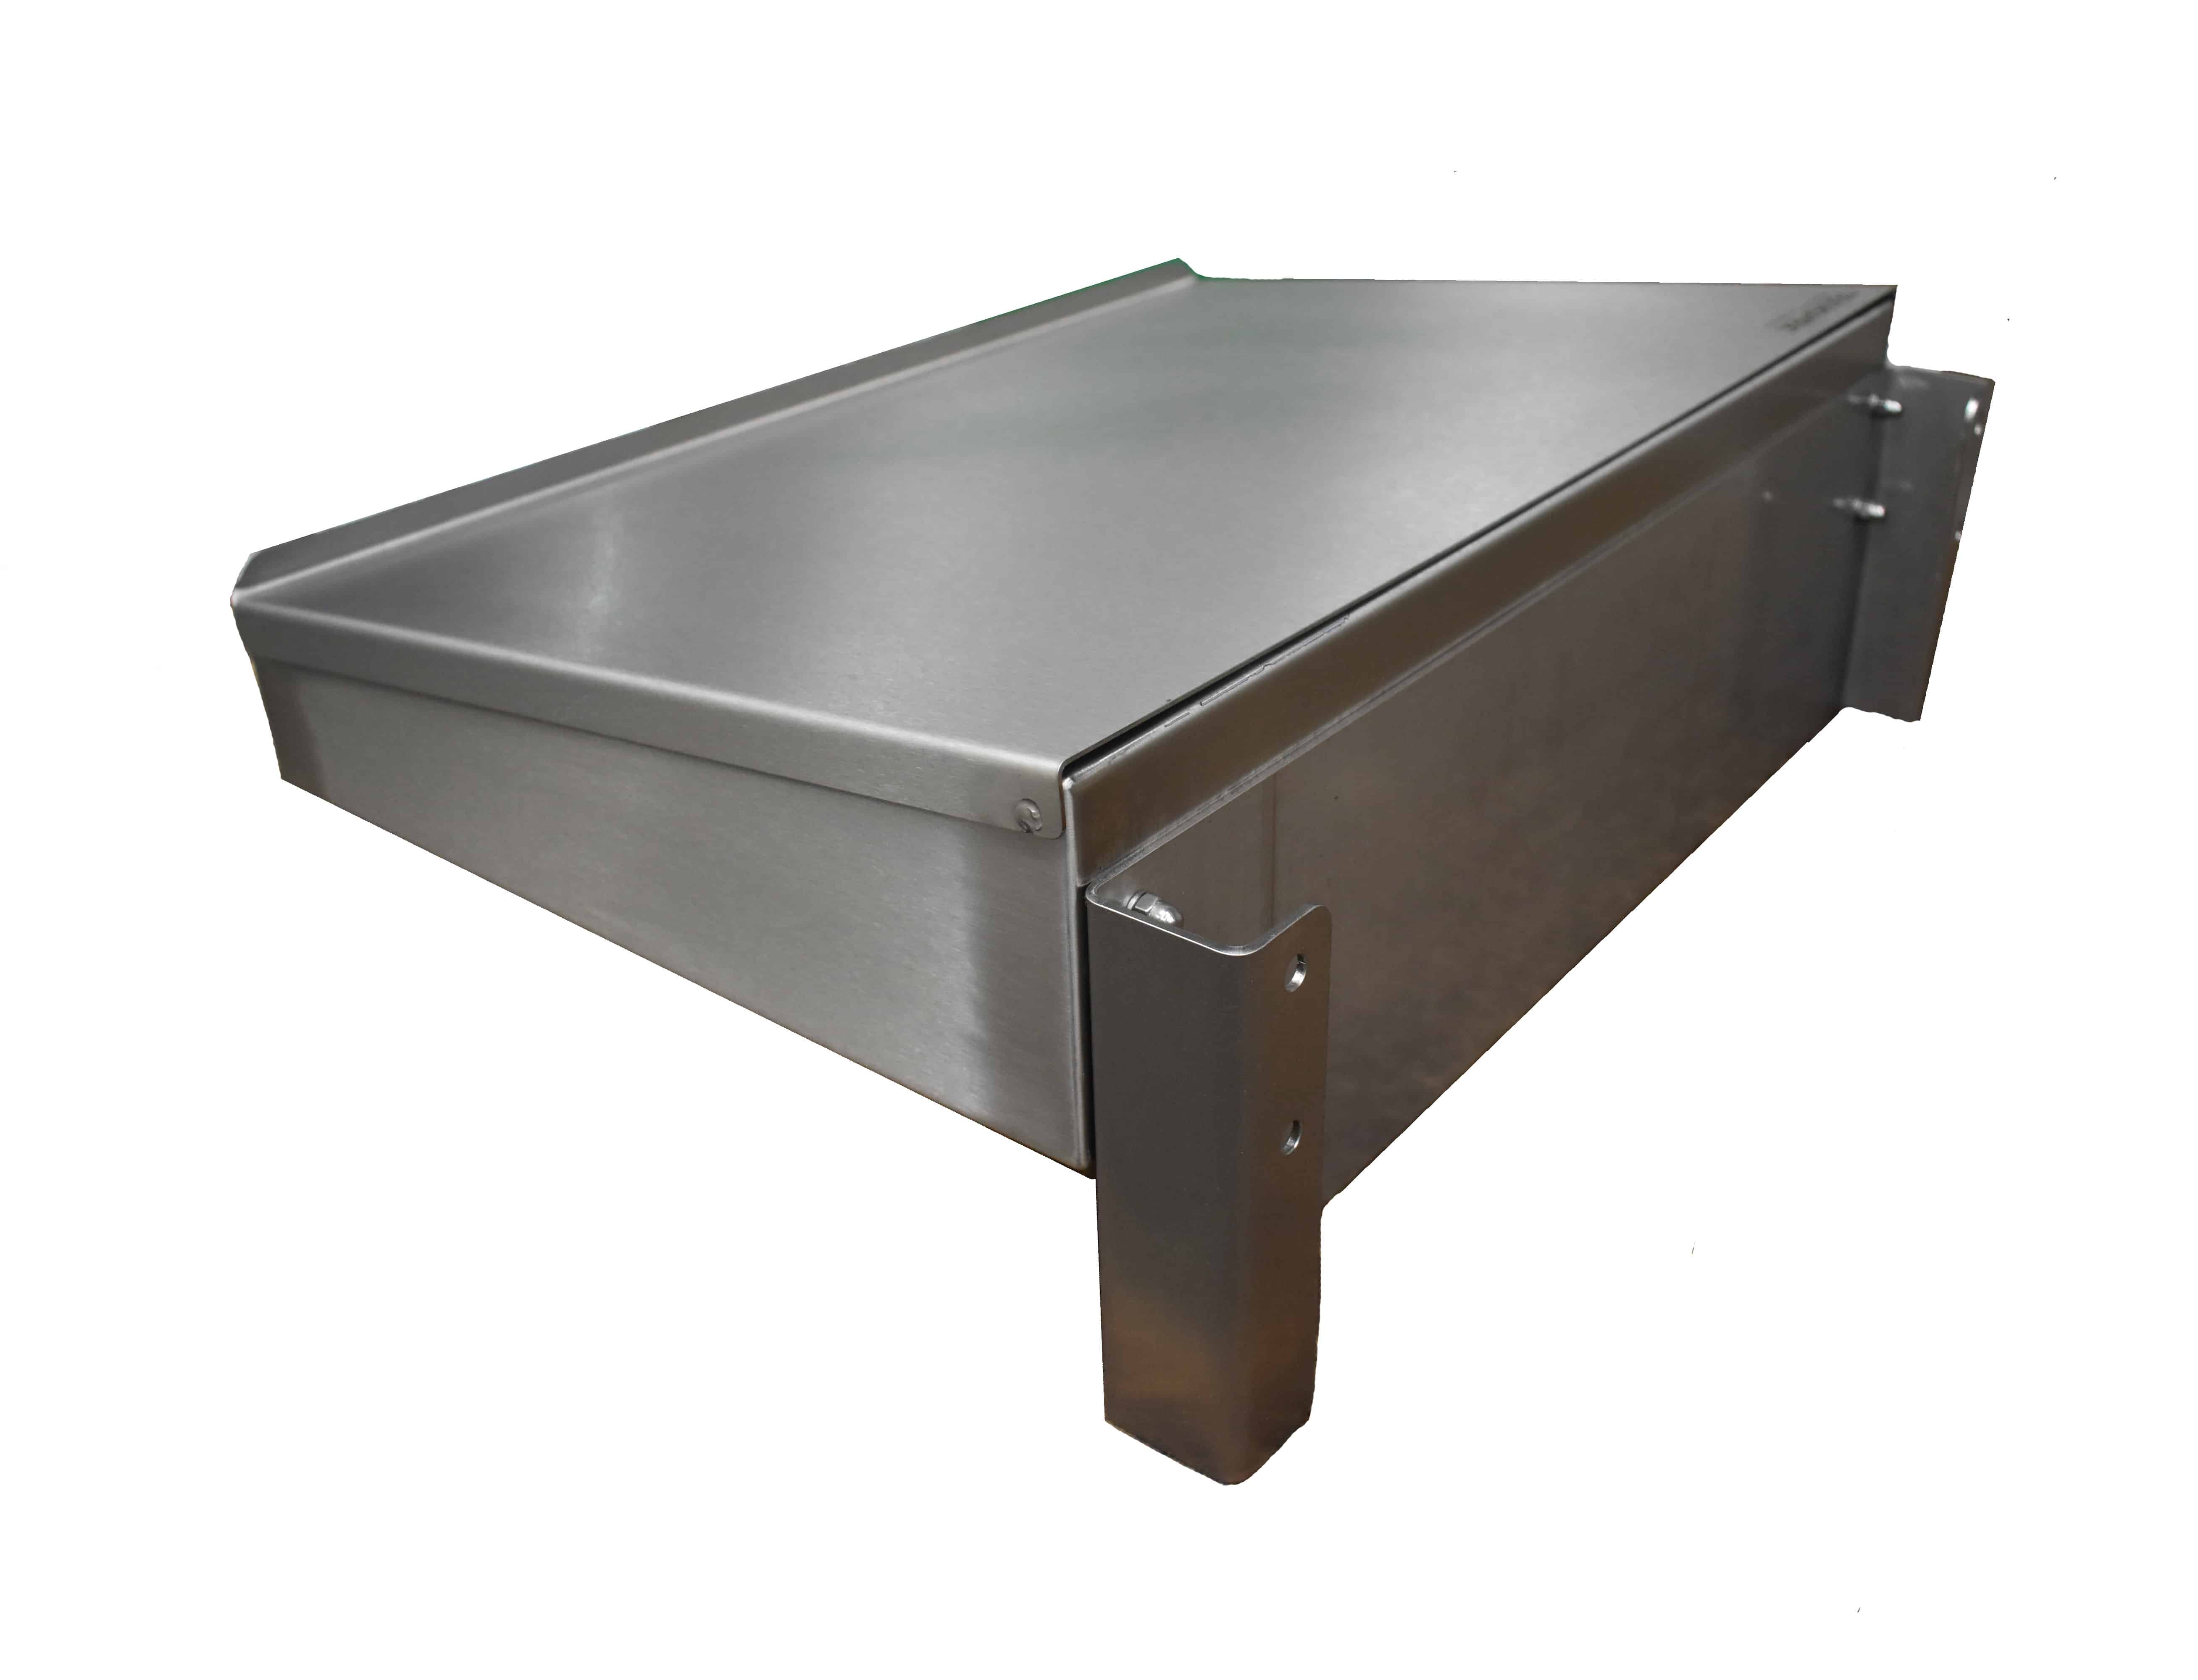 Stainless steel wall mounted writing desk